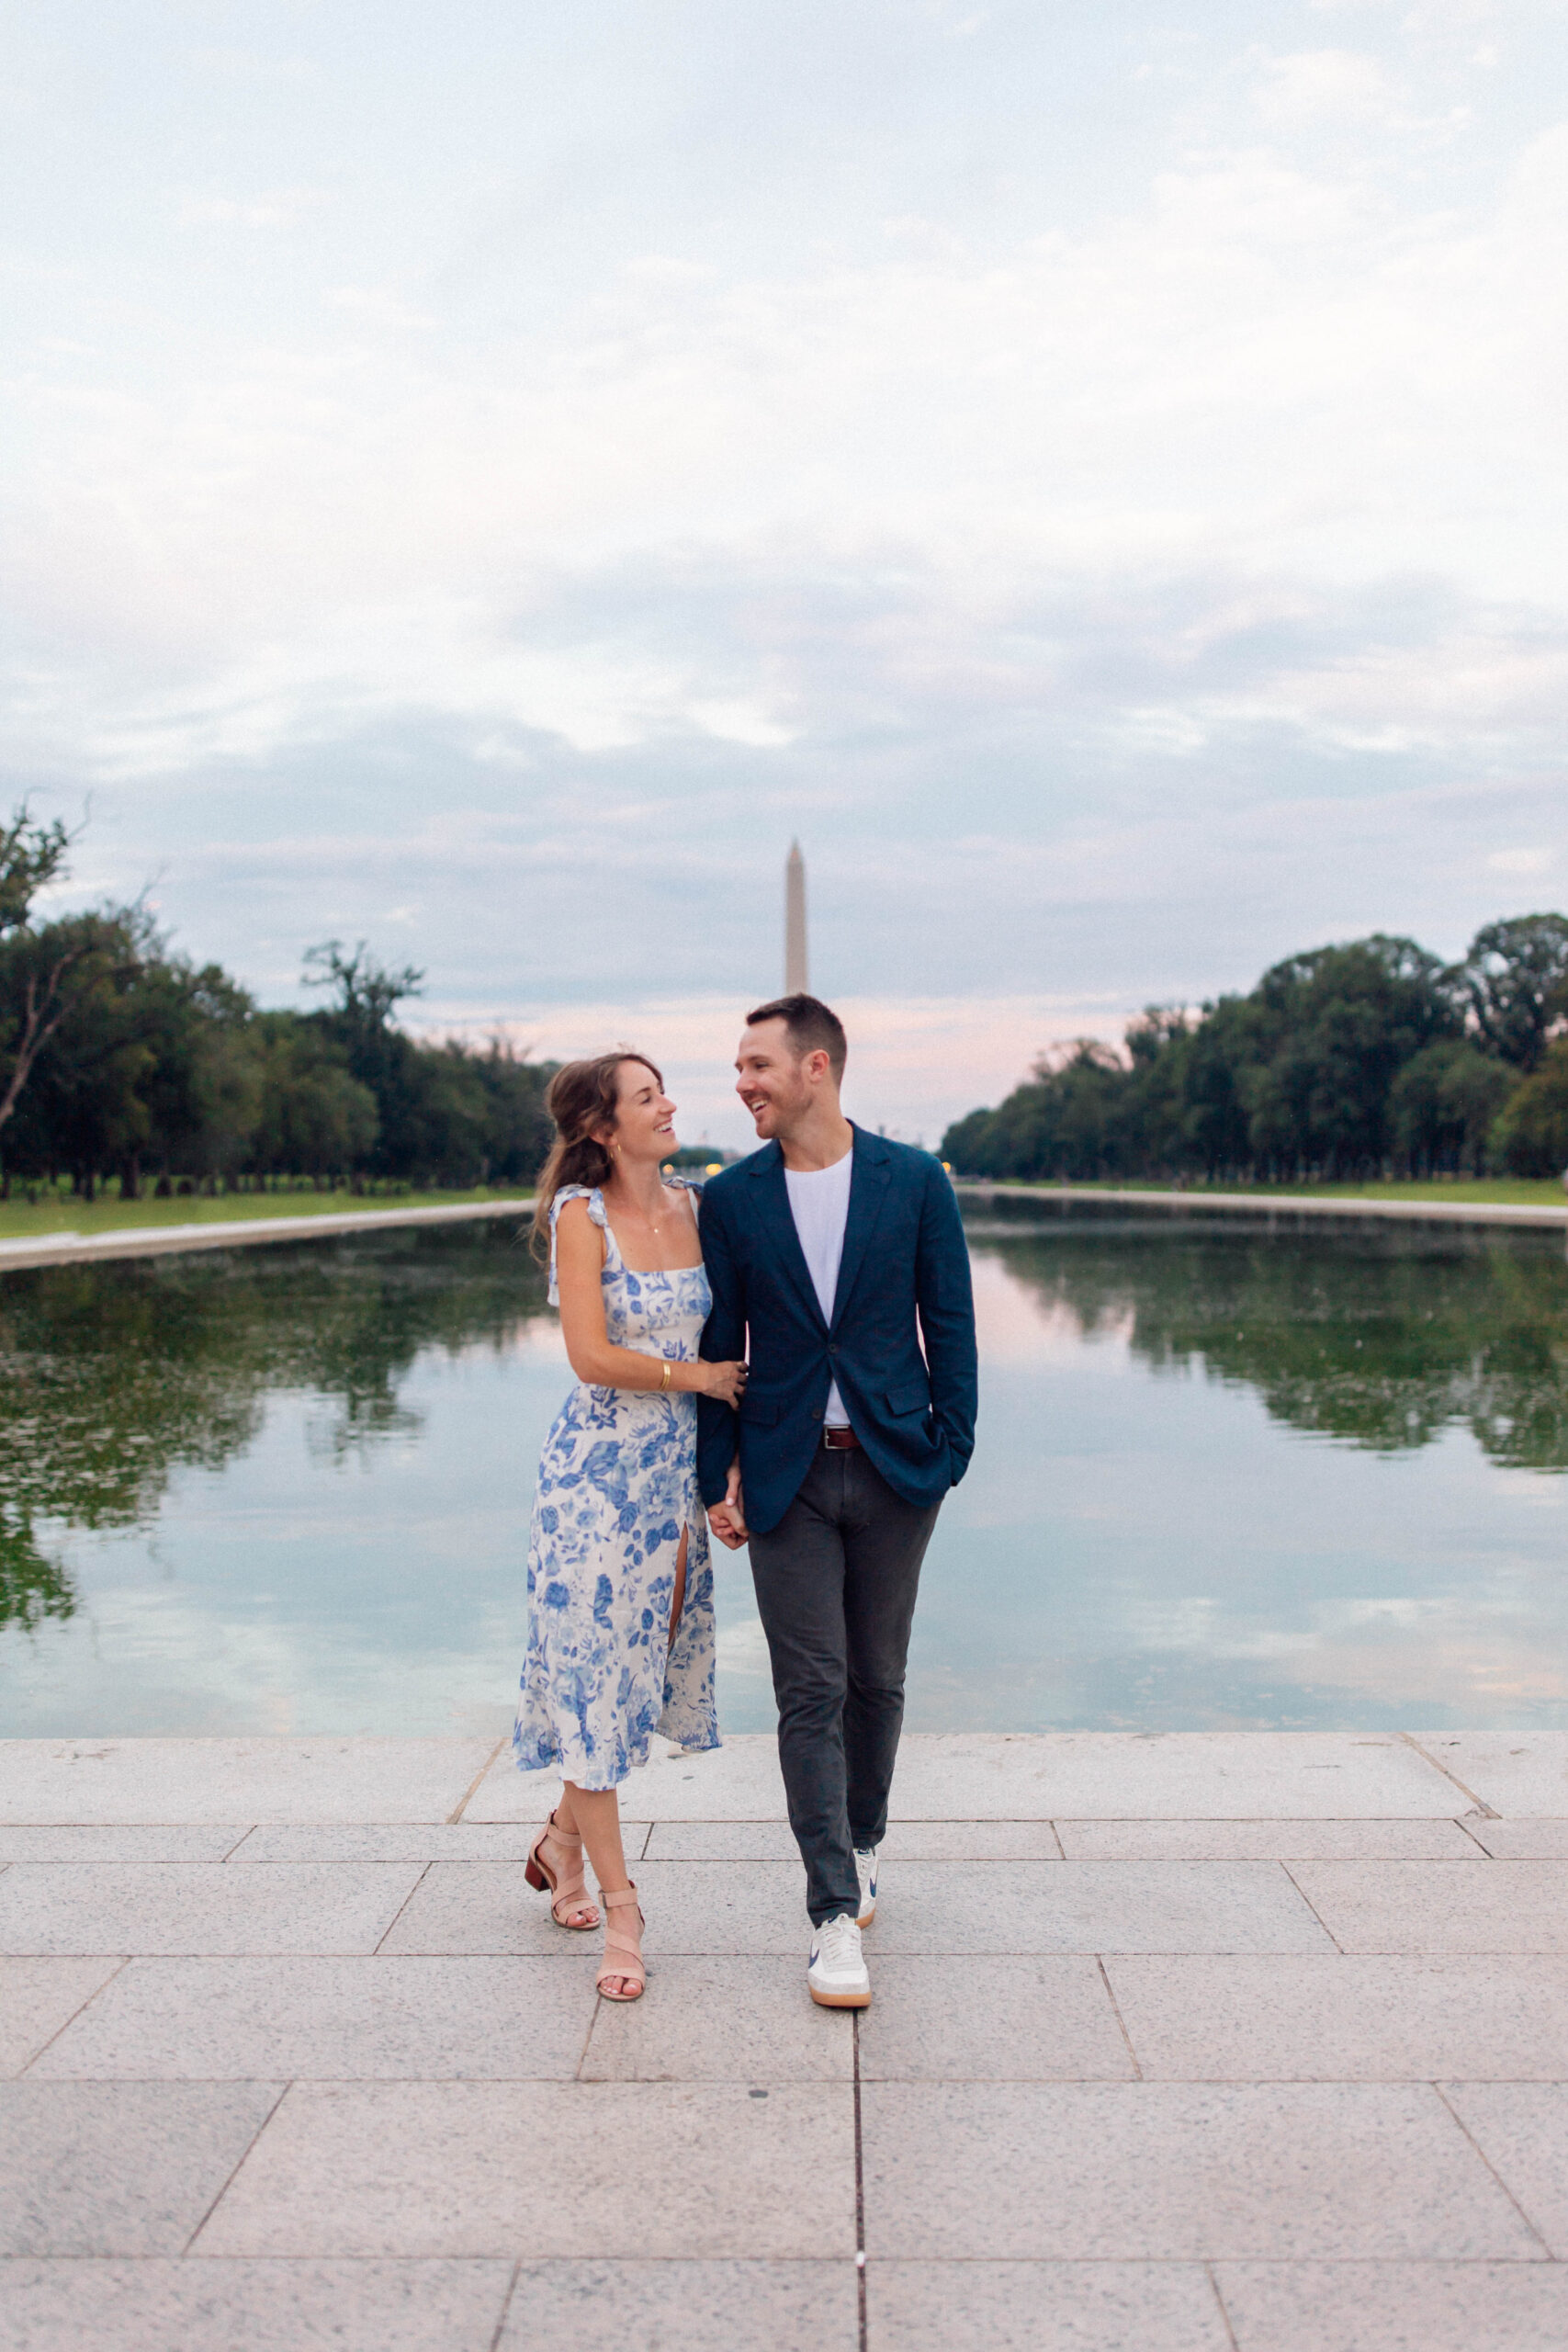 Romantic Washington D.C. Engagement Photo Session at The Washington Monument and Reflecting Pool. True to color, cinematic photography